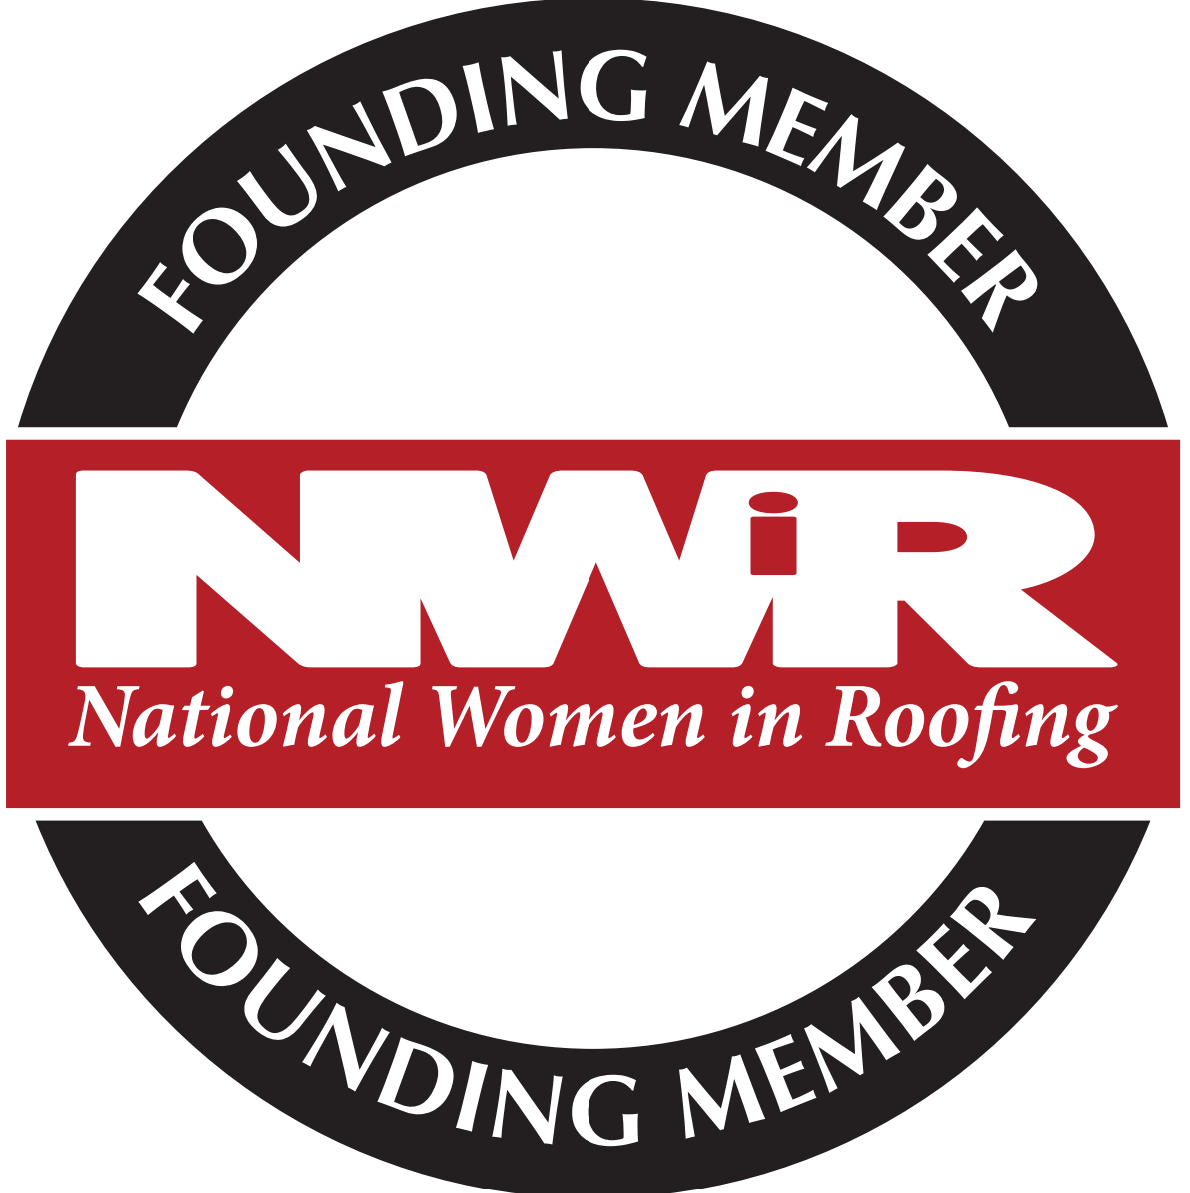 A national women in roofing founding member logo